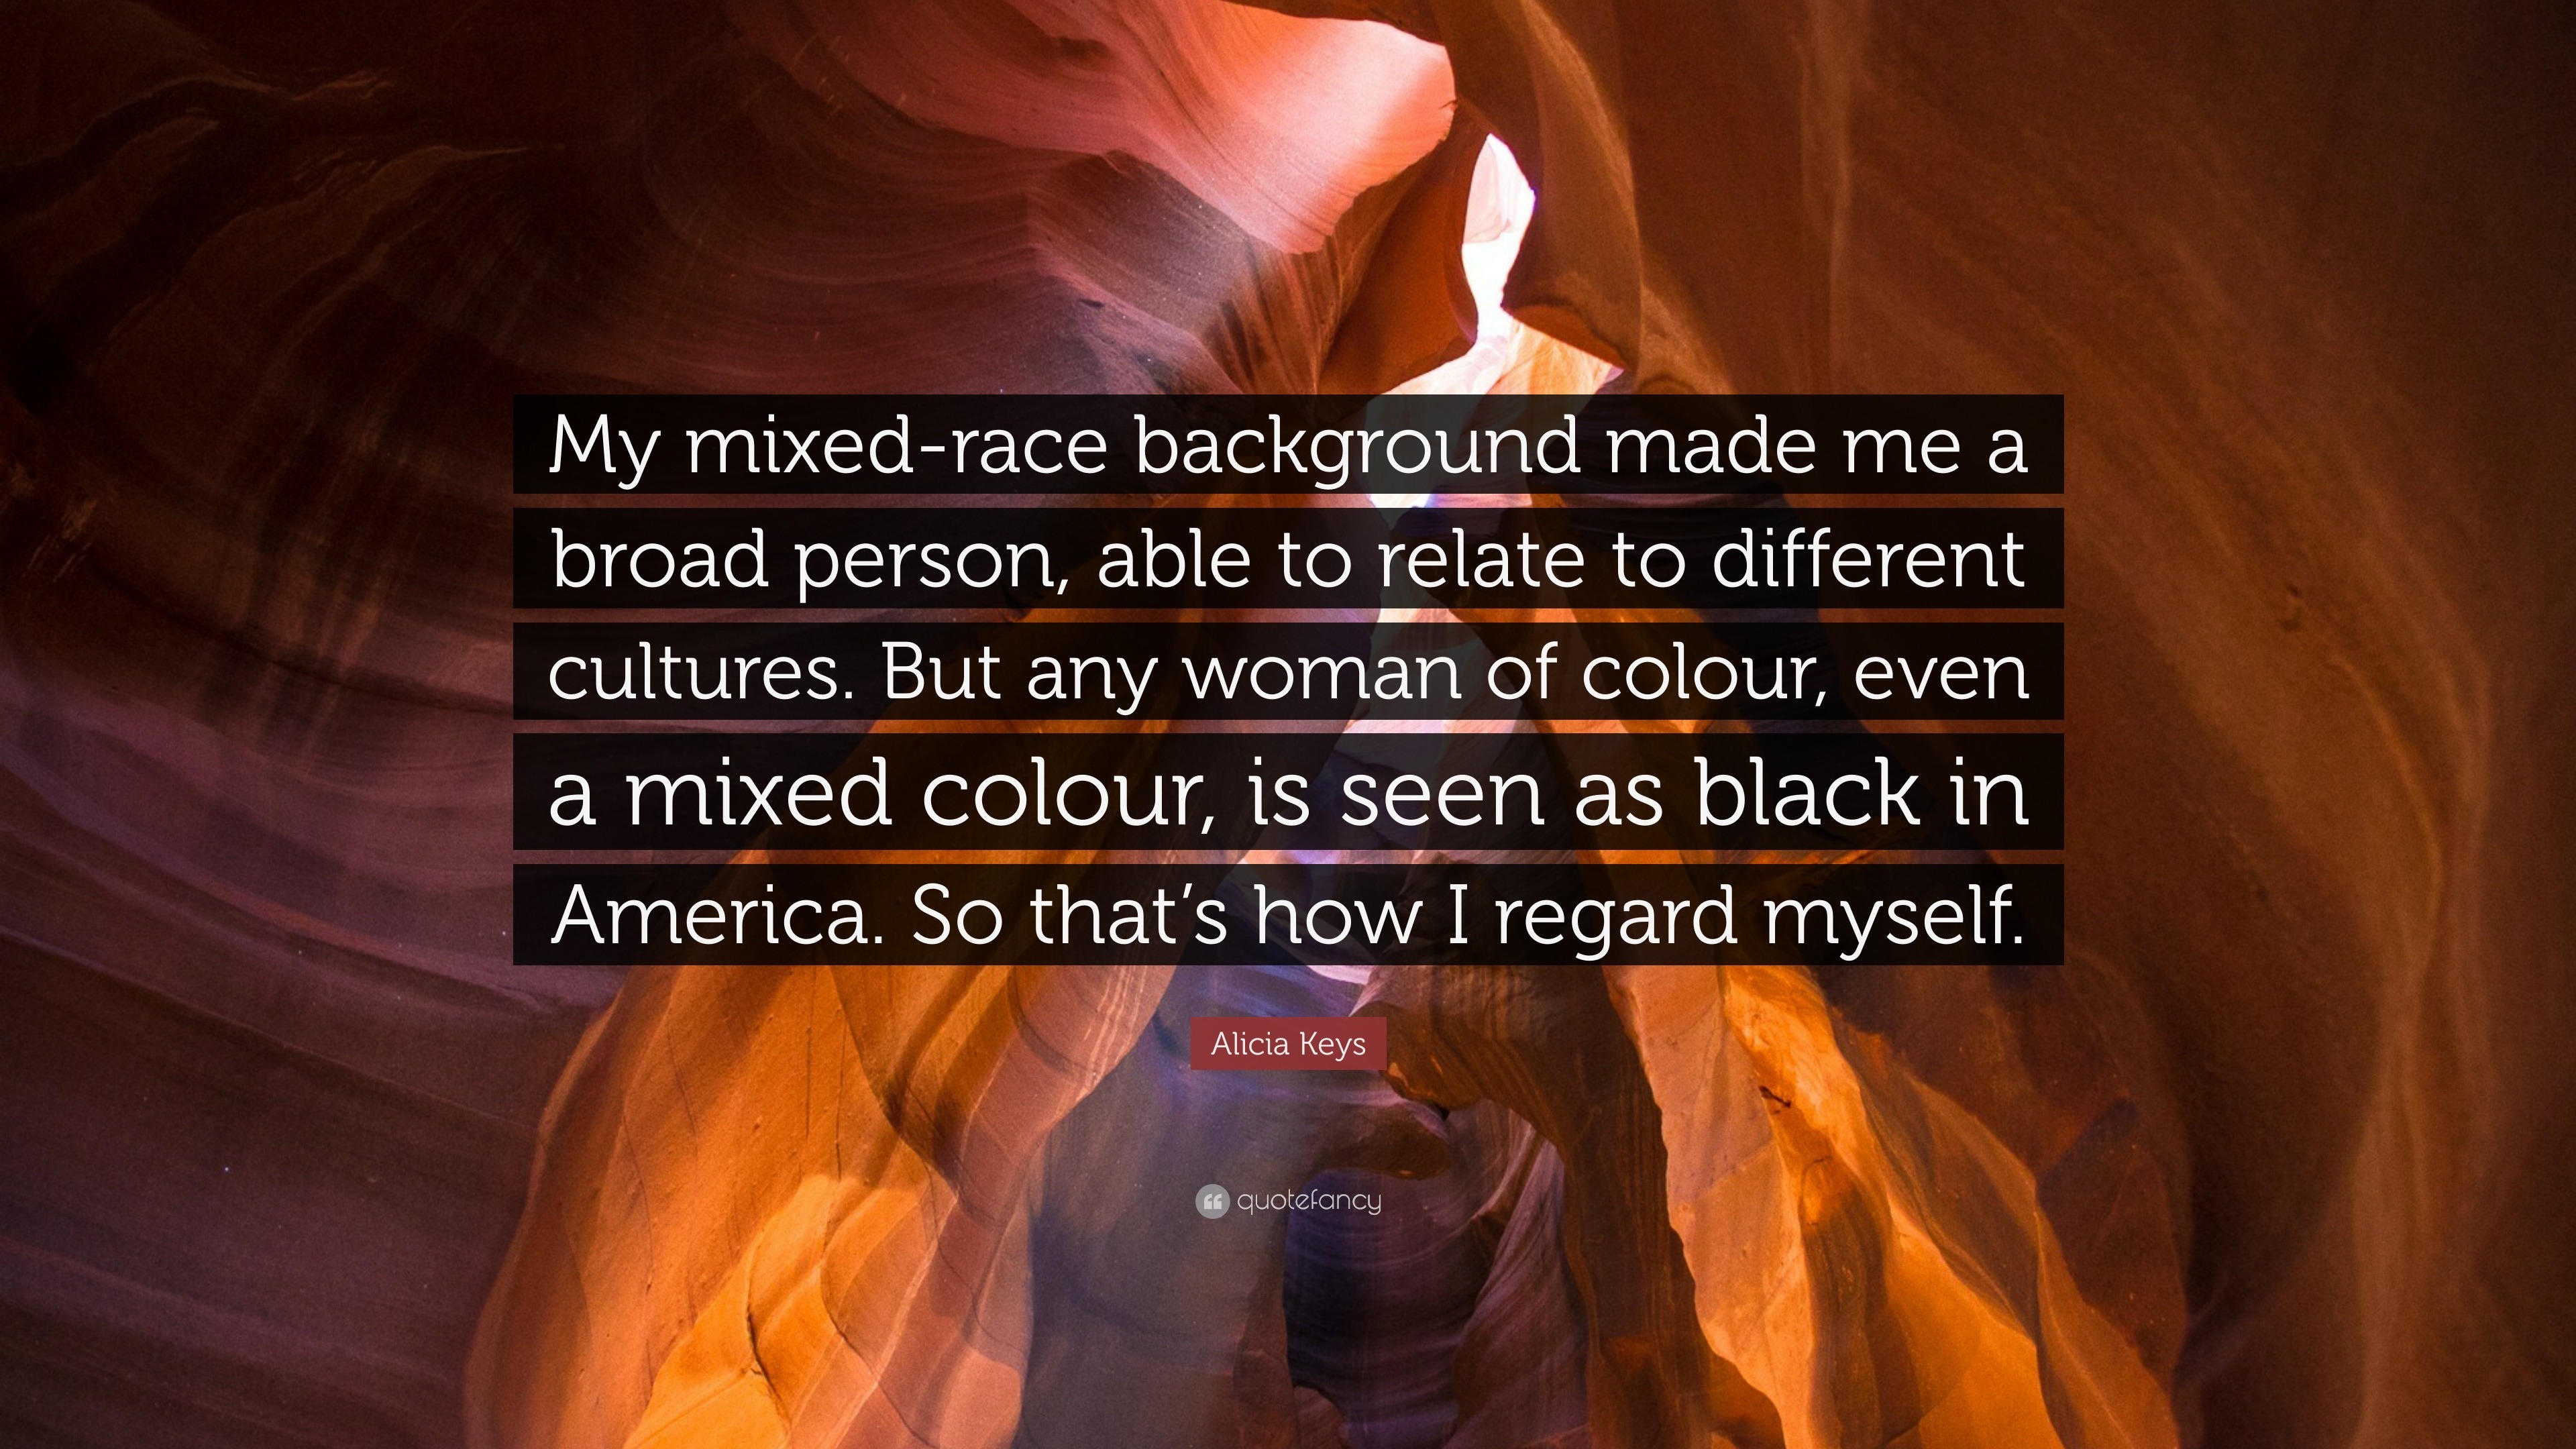 Alicia Keys Quote: “My mixed-race background made me a broad person, able to relate to different cultures. But woman of colour, even m...”